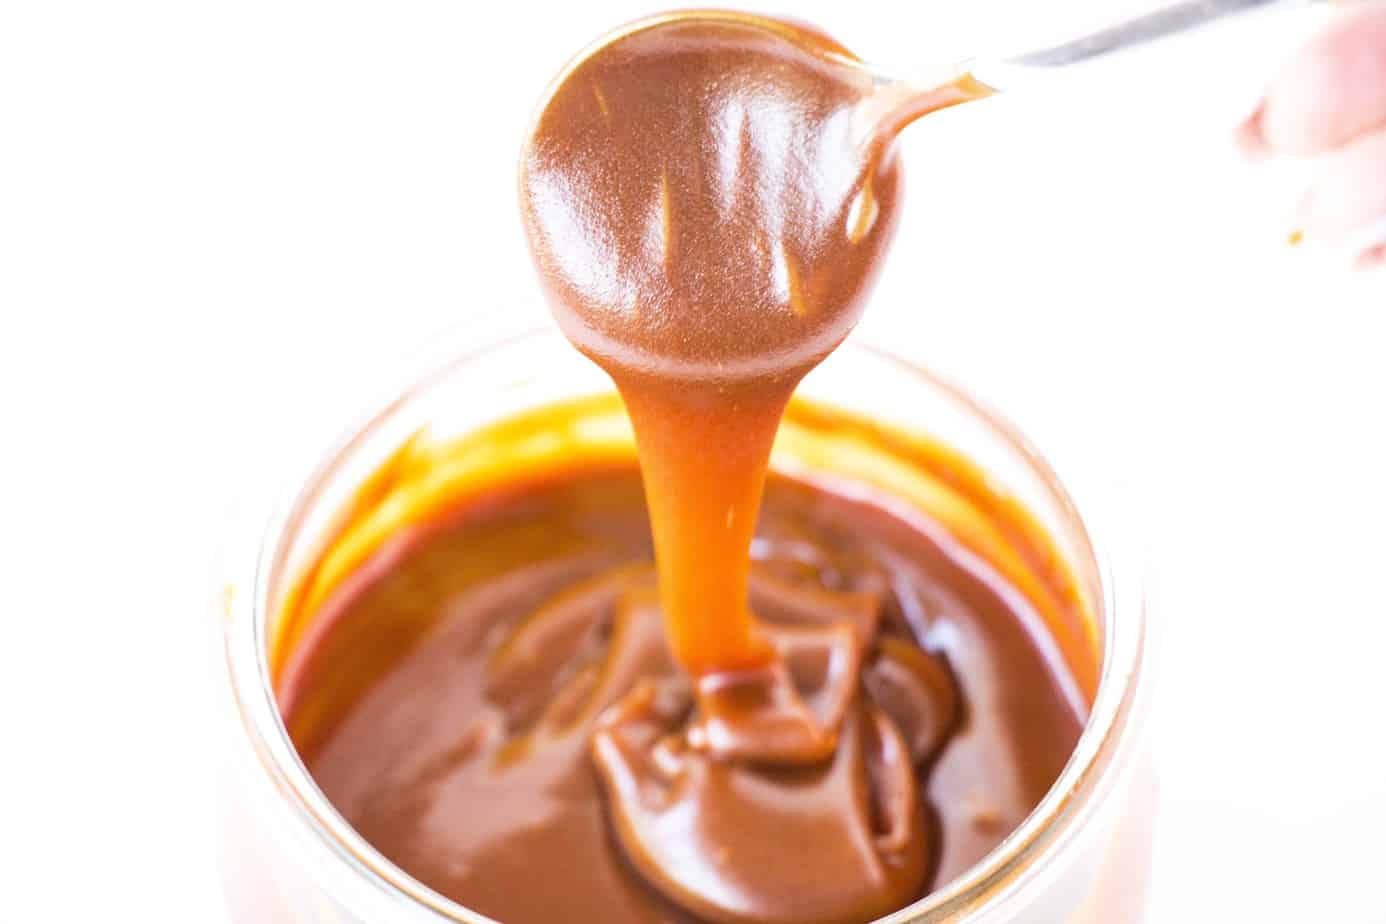 Salted Caramel Sauce dripping from a spoon